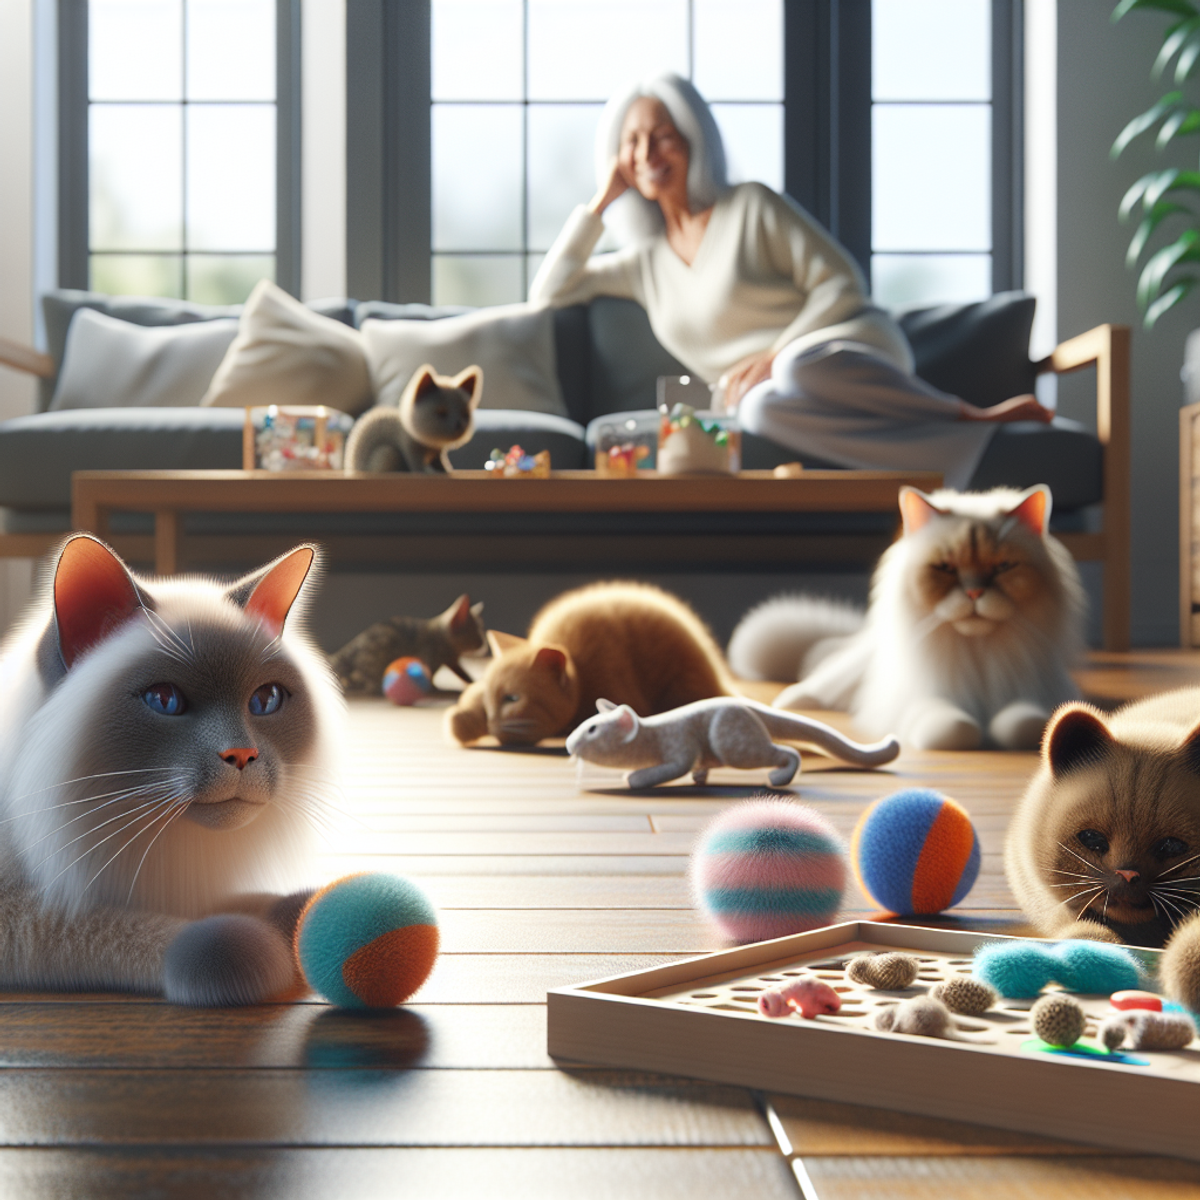 Two older cats, a Siamese and a Persian, play with soft fleece balls and catnip infused plush mice in a tranquil indoor setting. A middle-aged Hispani